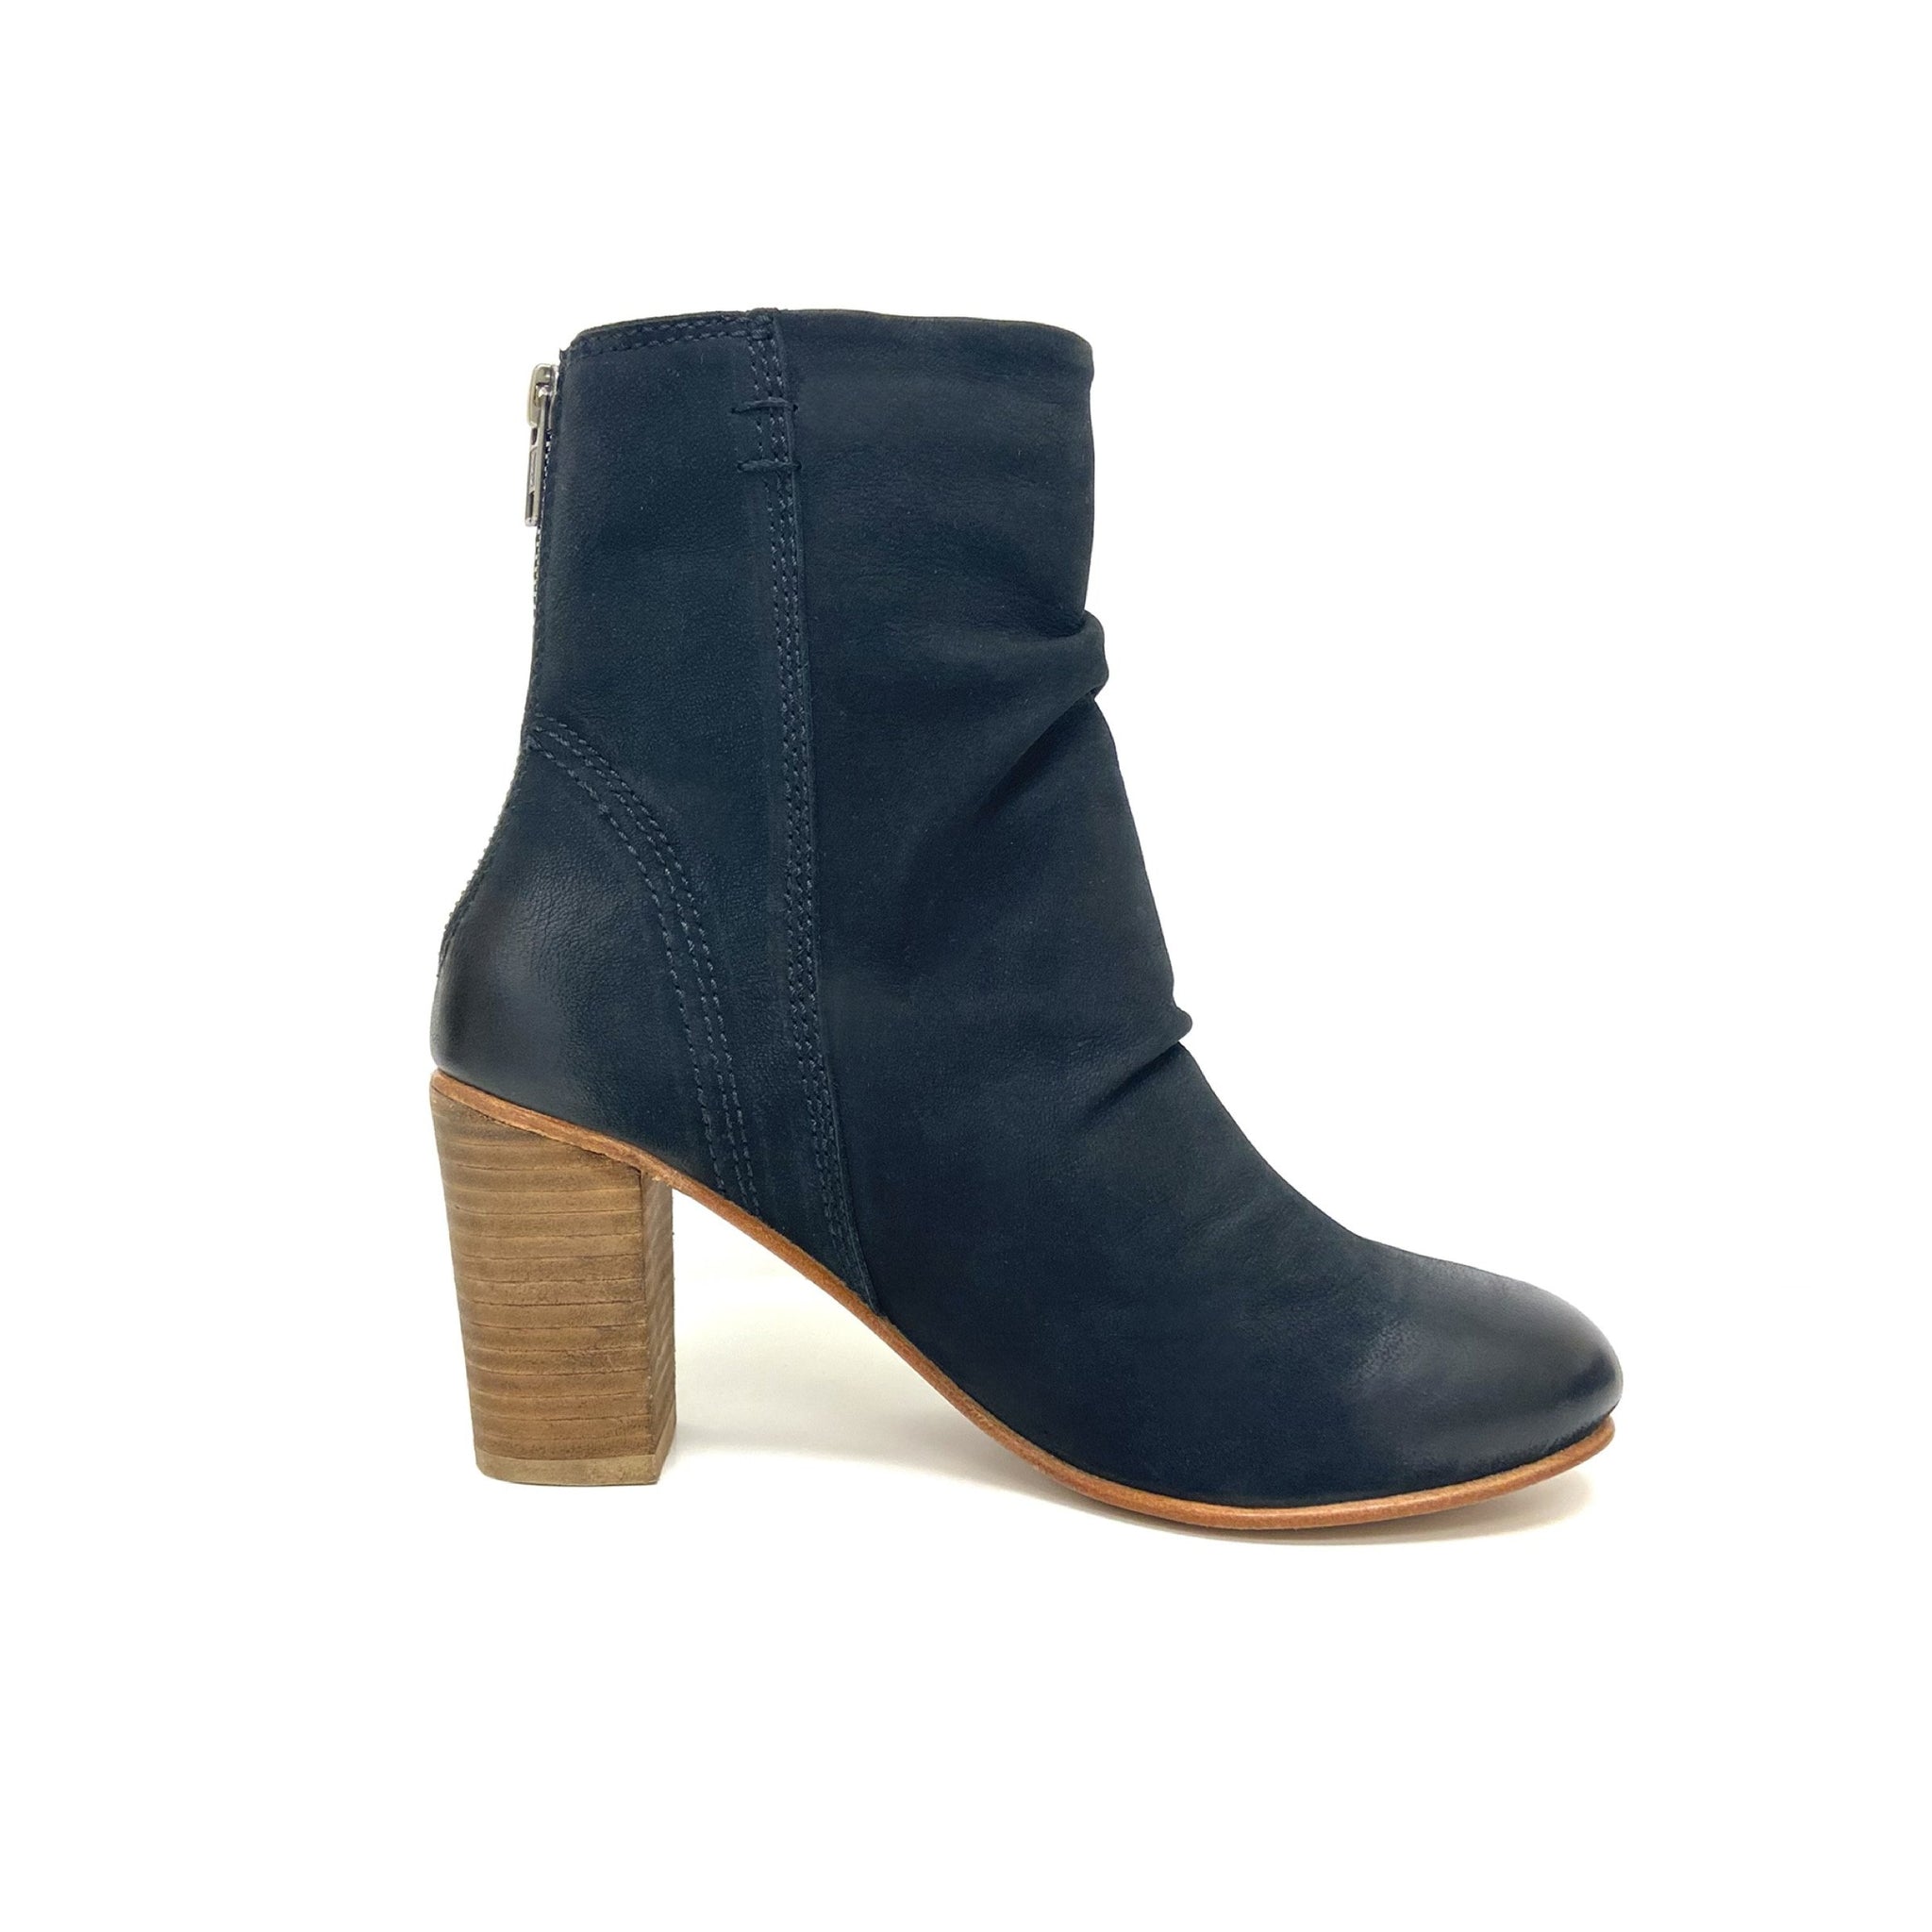 Nicole Black Suede Slouchy Boot